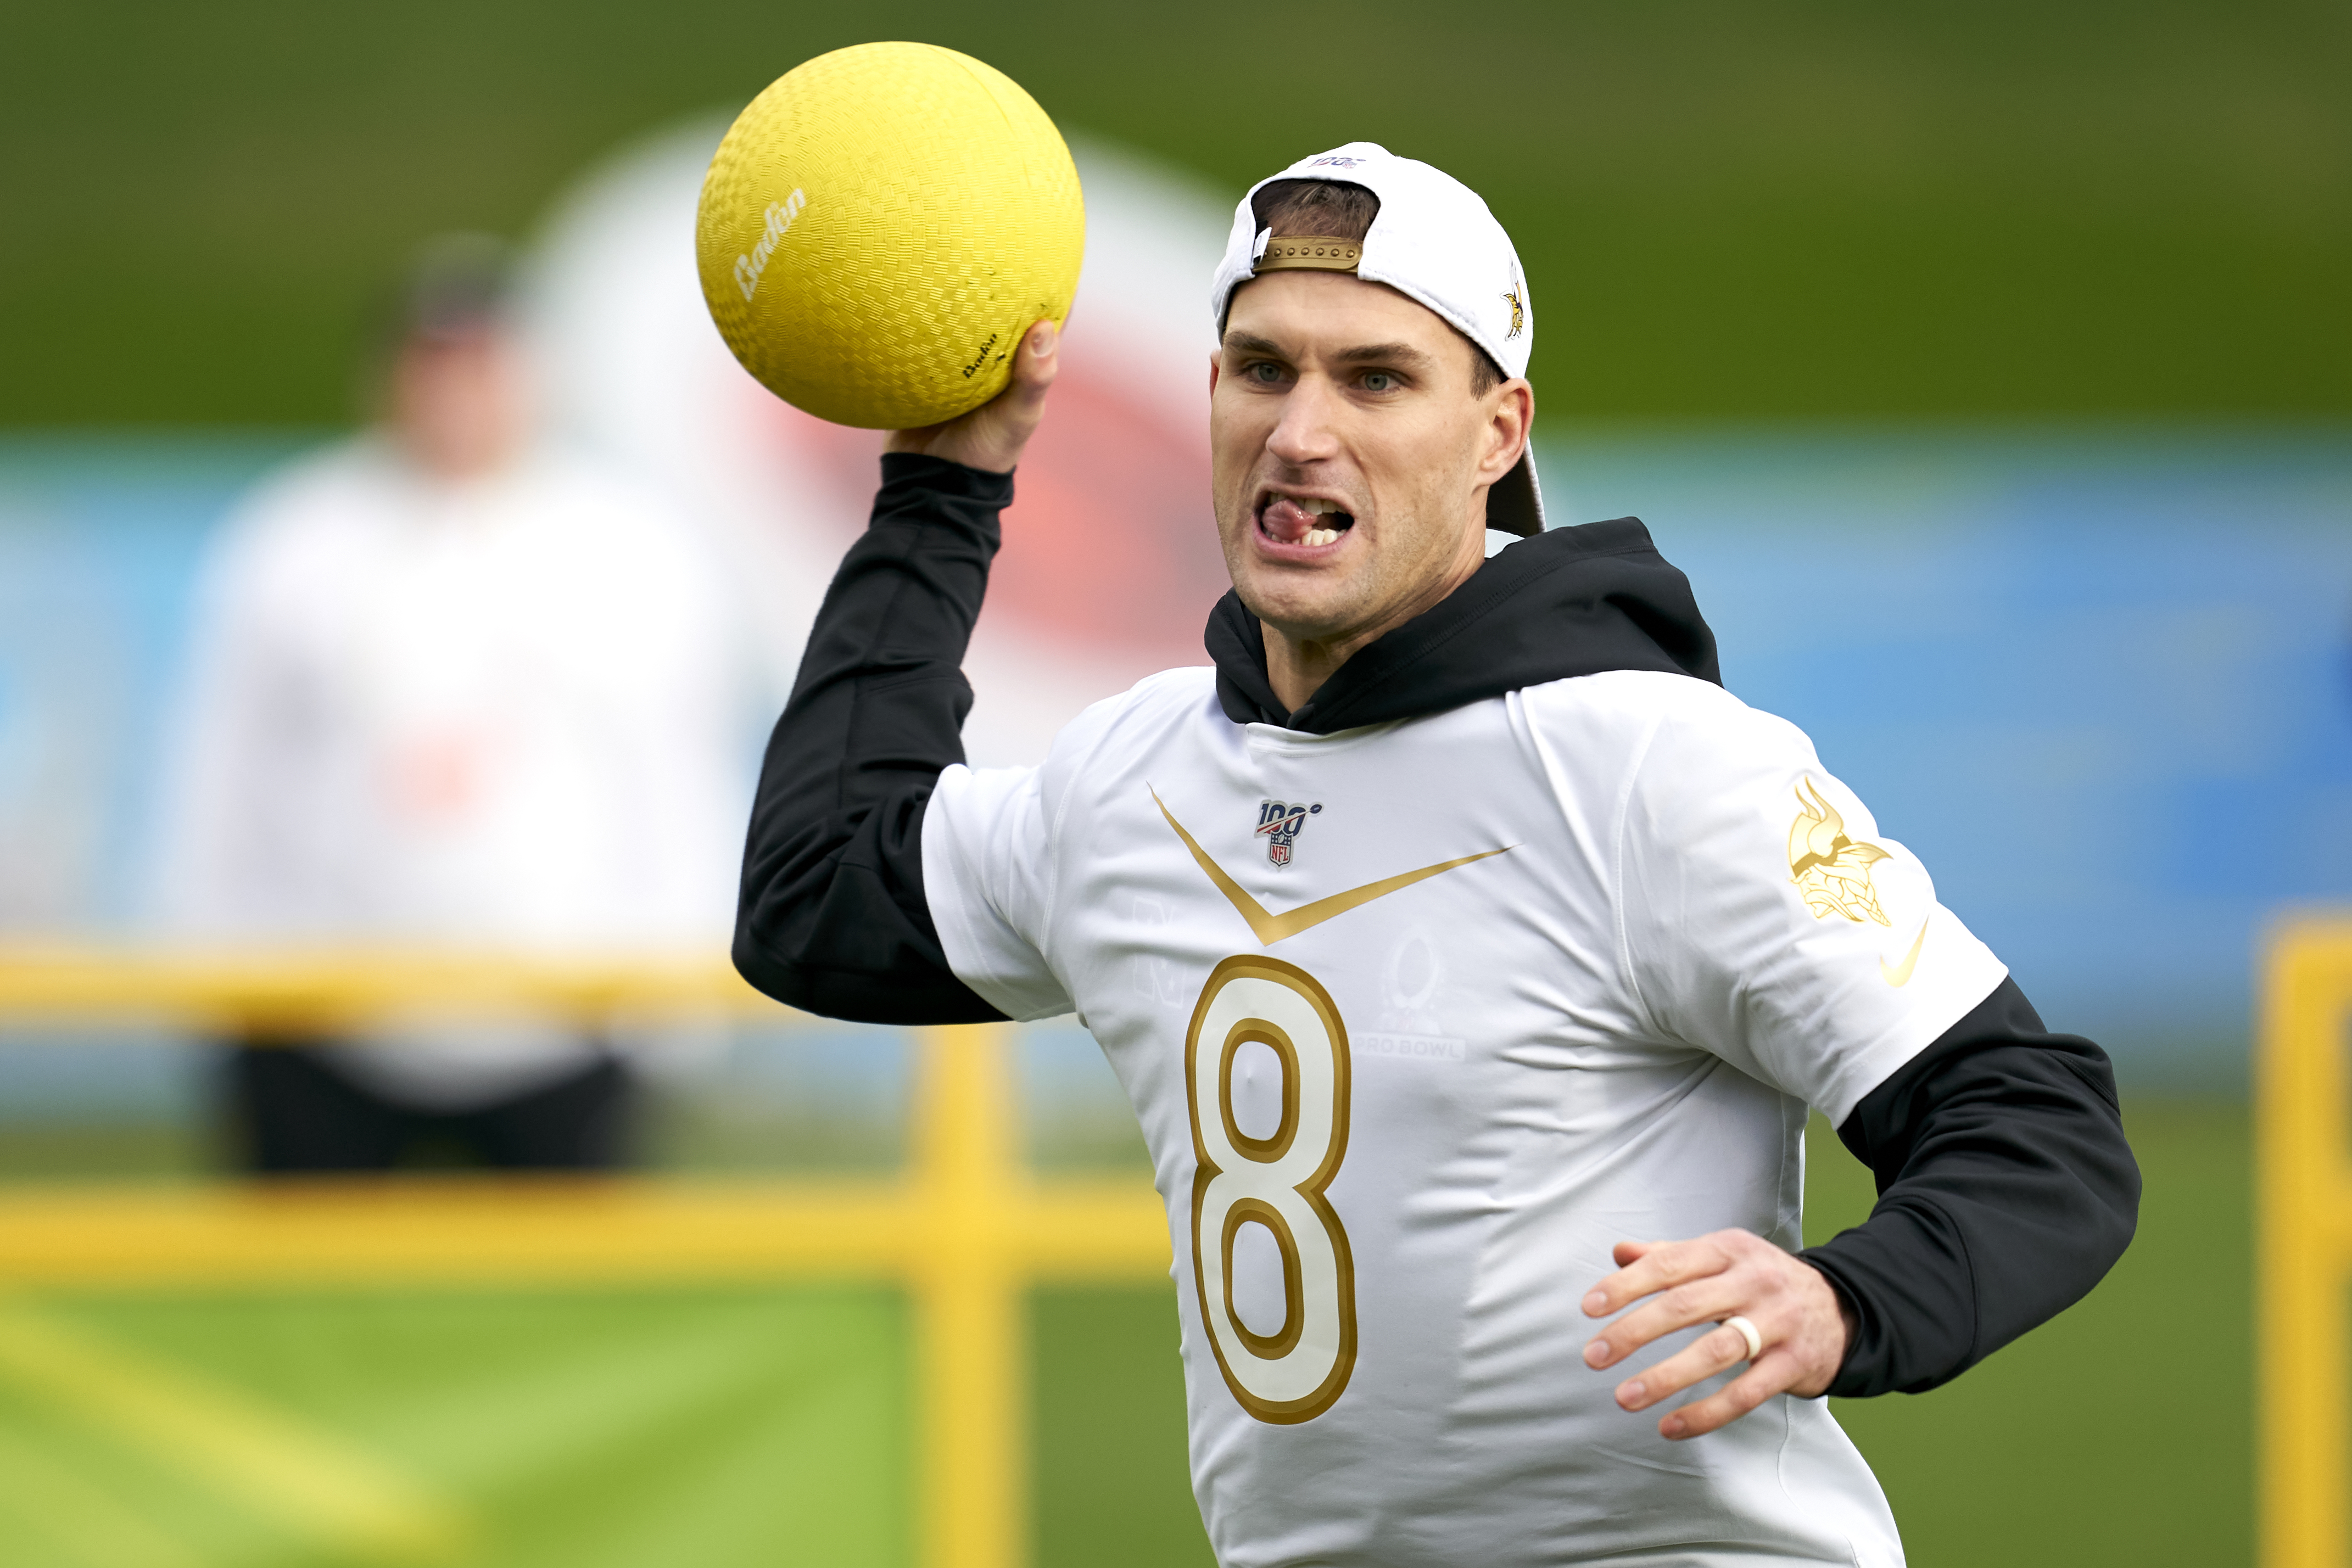 Kirk Cousins #8 of the Minnesota Vikings competes in the Epic Pro Bowl Dodgeball challenge at the 2020 Pro Bowl Skills Showdown Wednesday, Jan. 22, 2020, in Kissimmee, Florida.